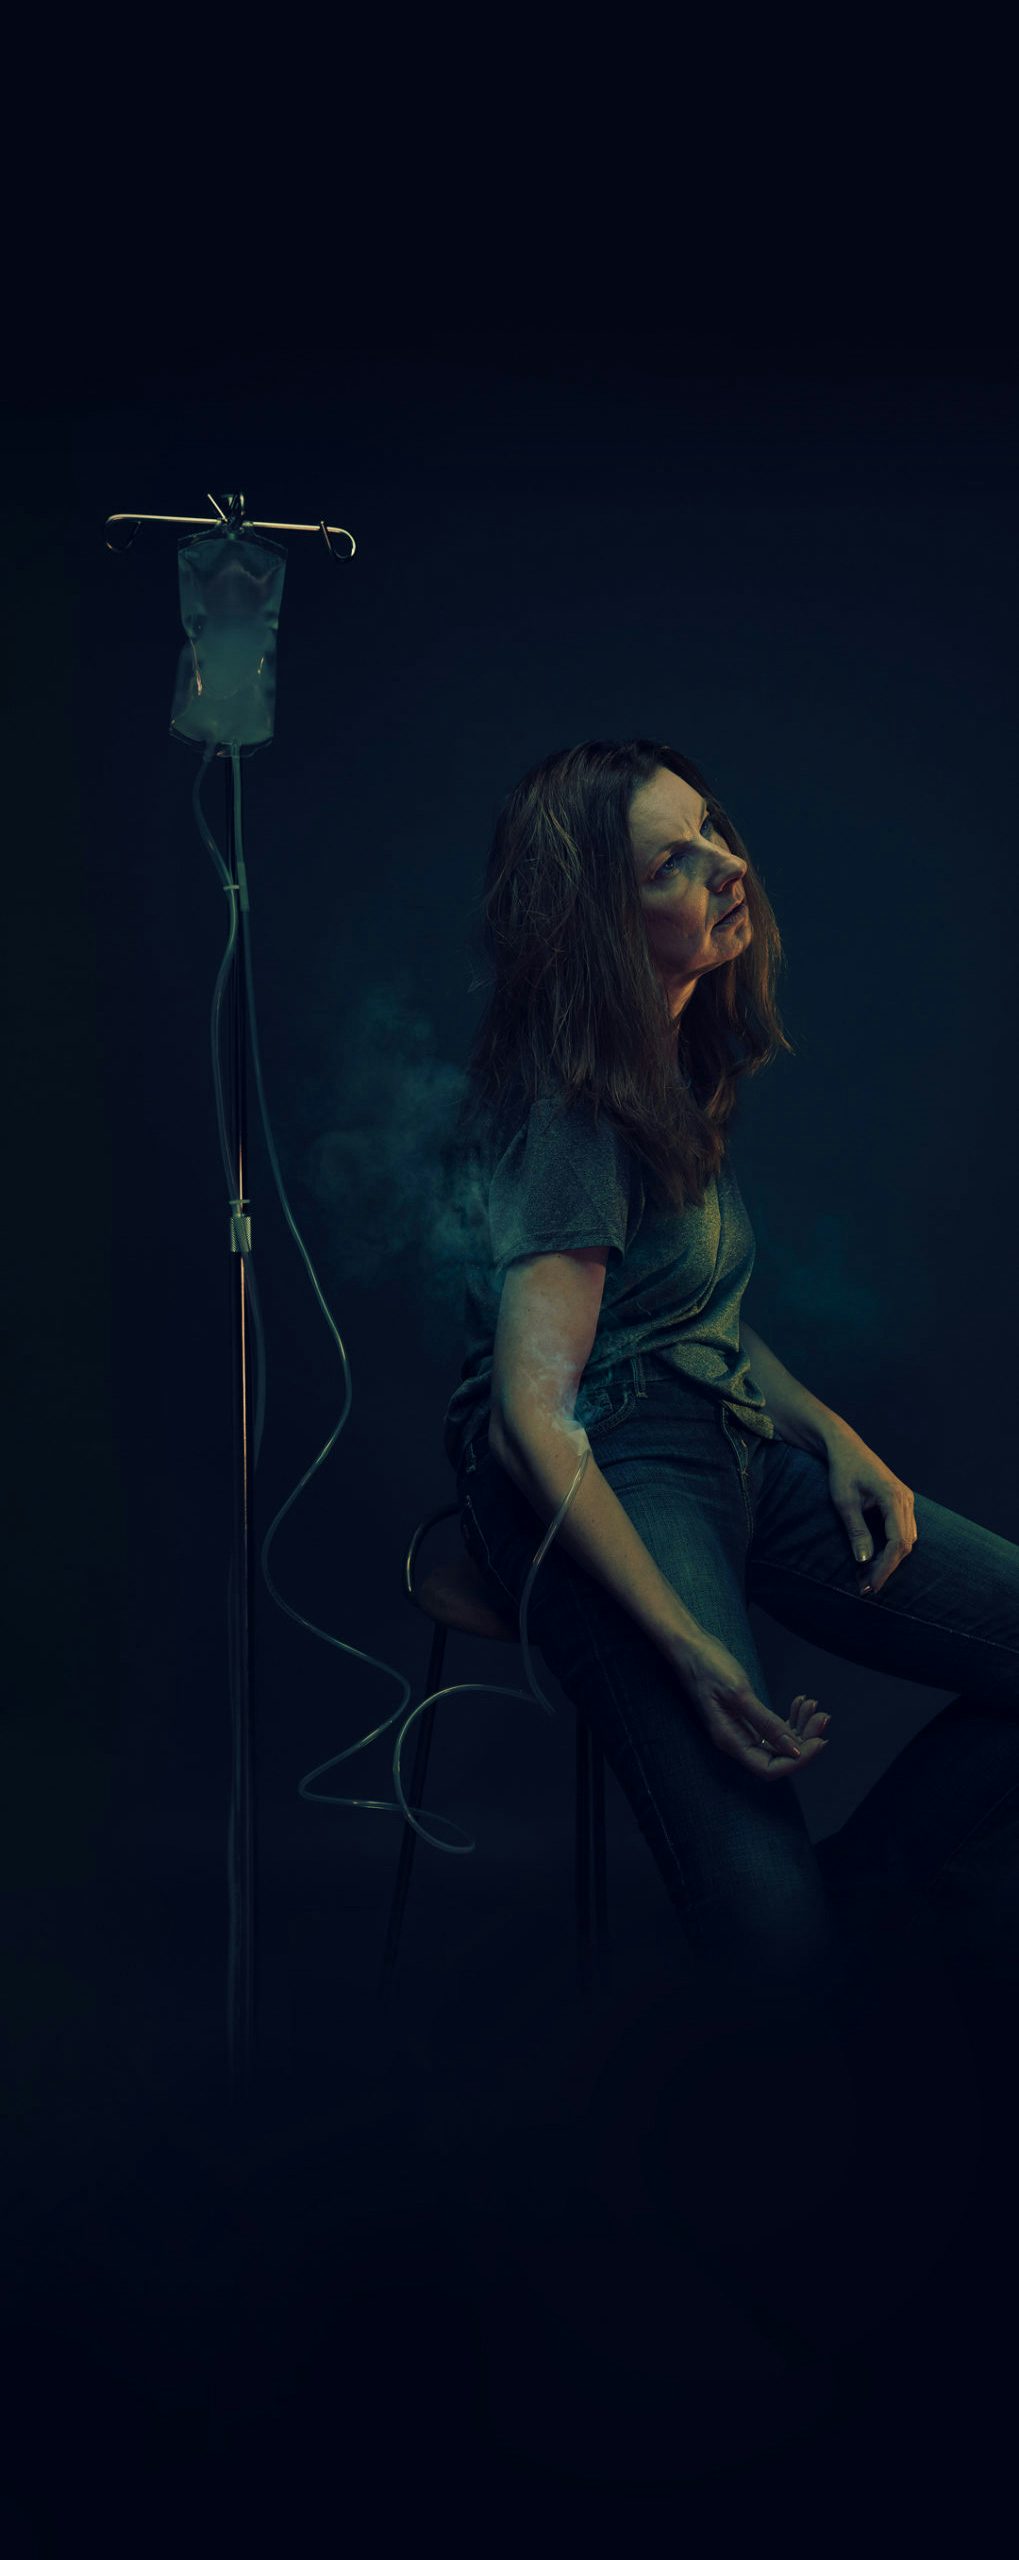 Woman sitting in the dark with IV bag filled with smoke